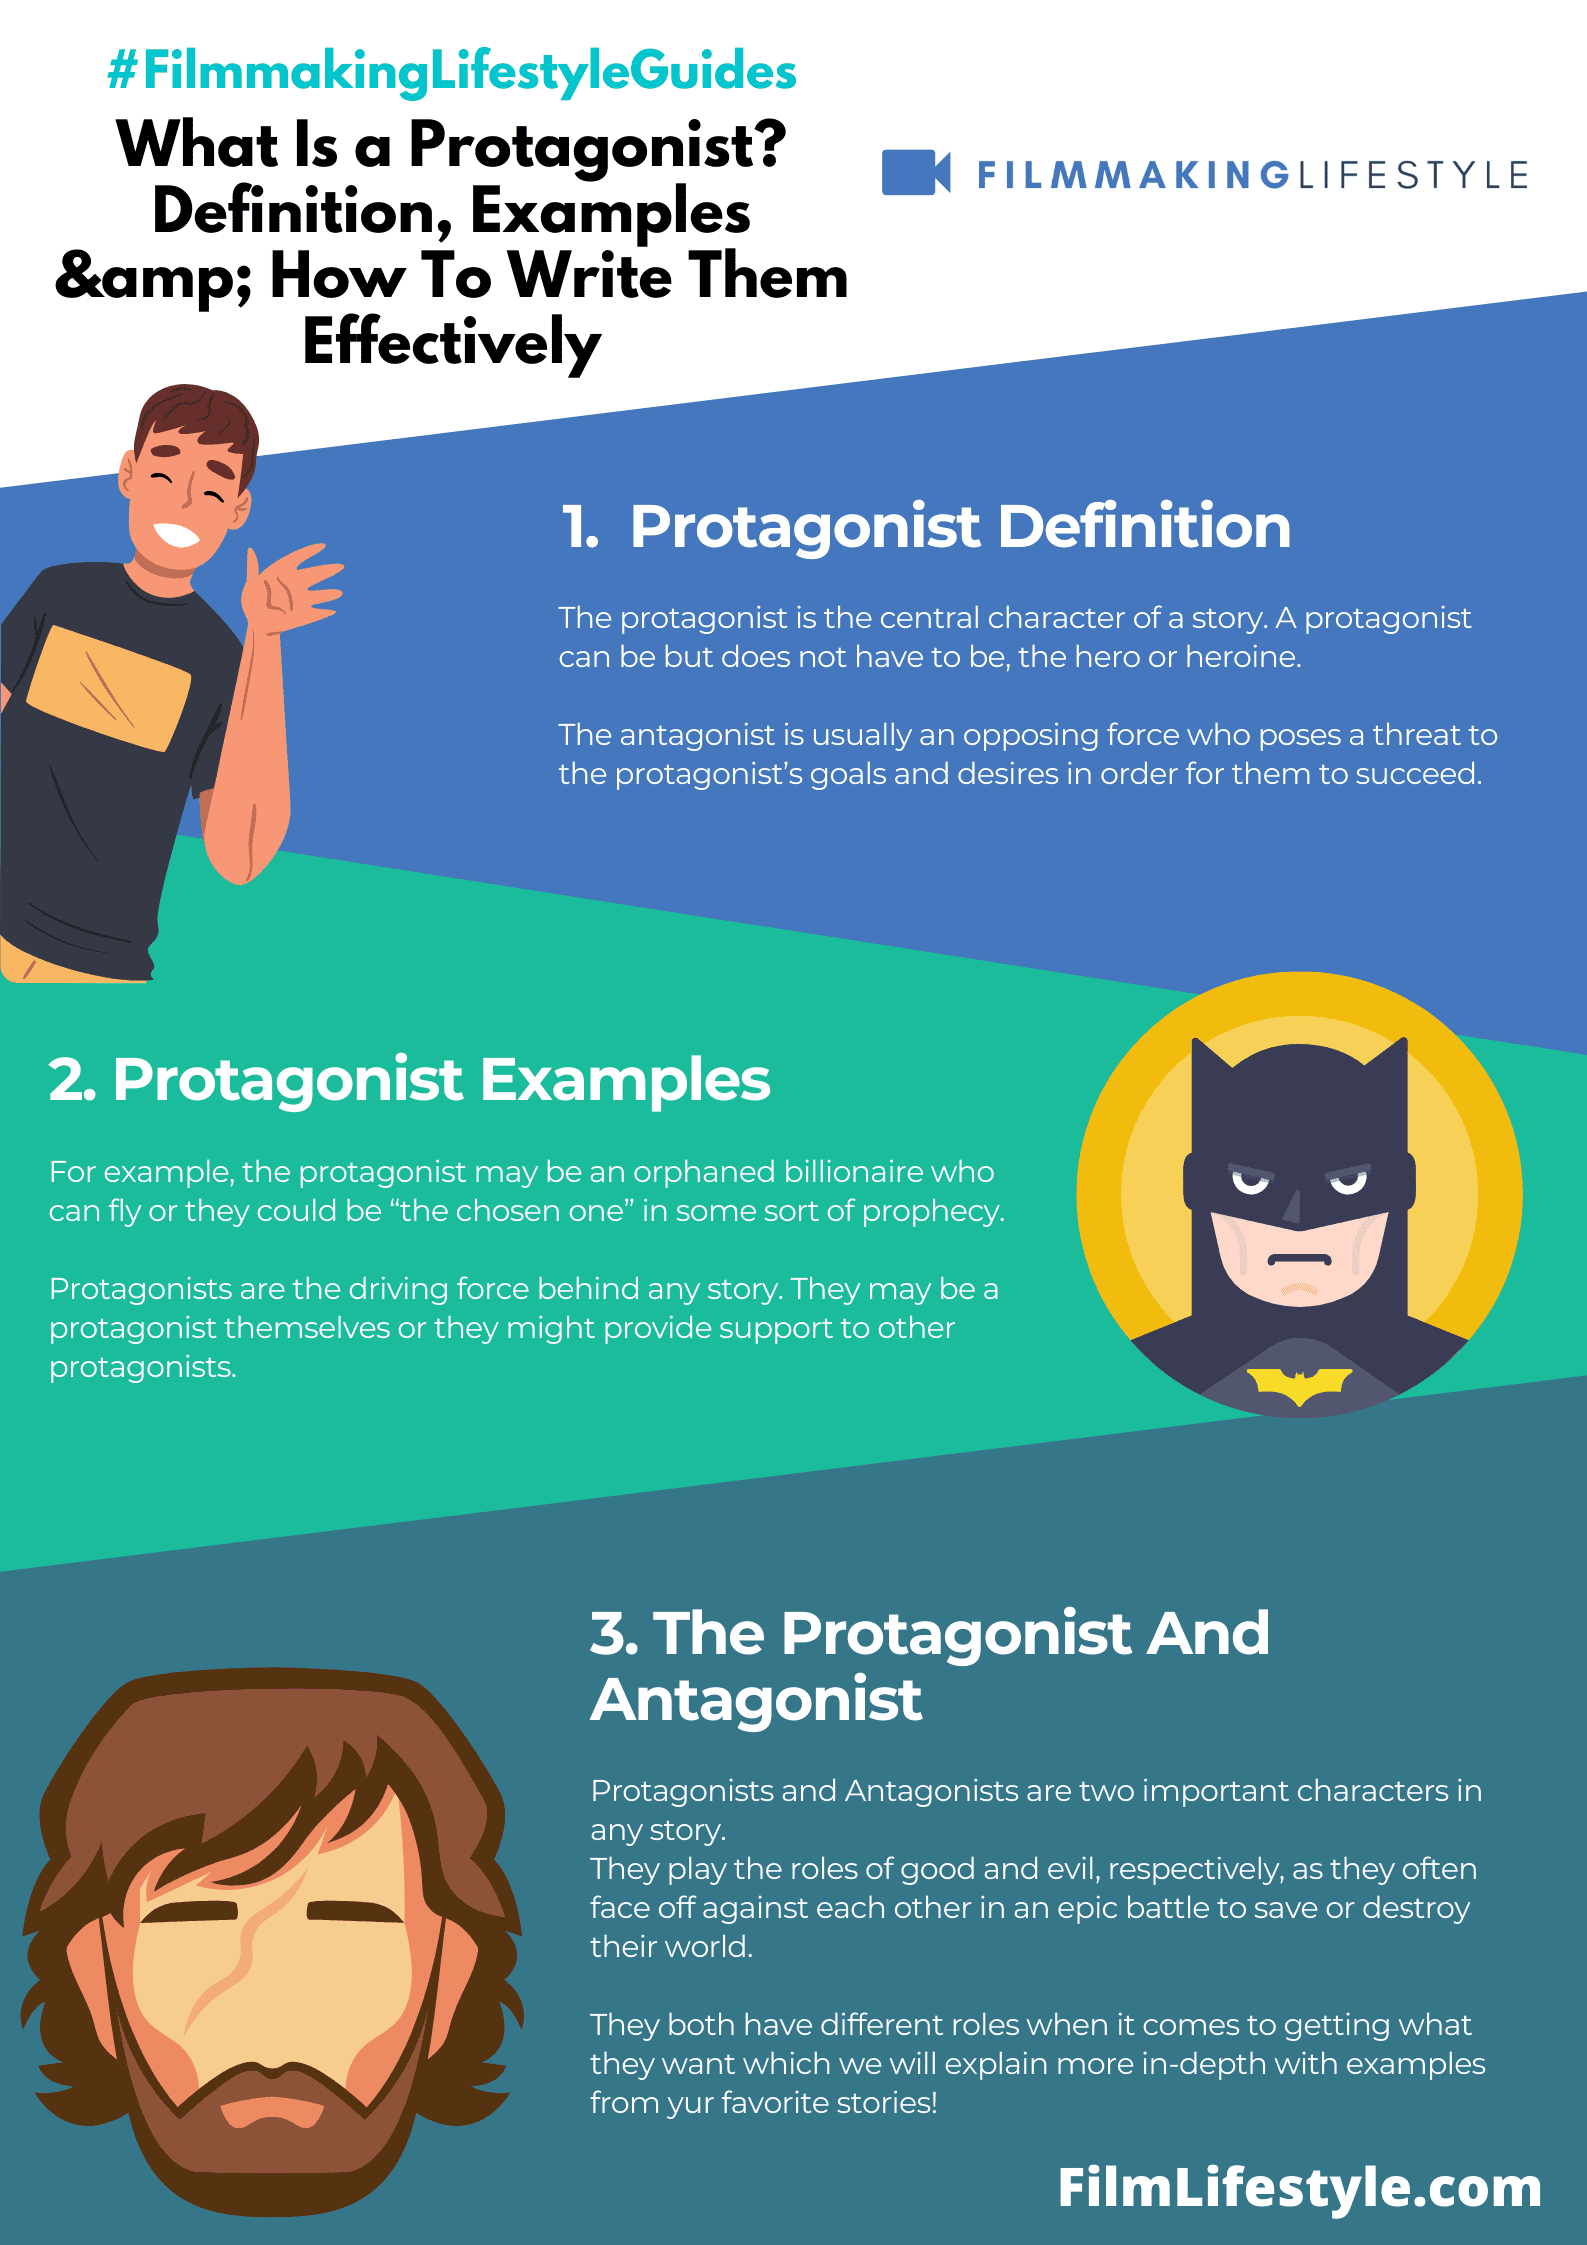 What Is a Protagonist? Definition, Examples & How To Write Them Effectively